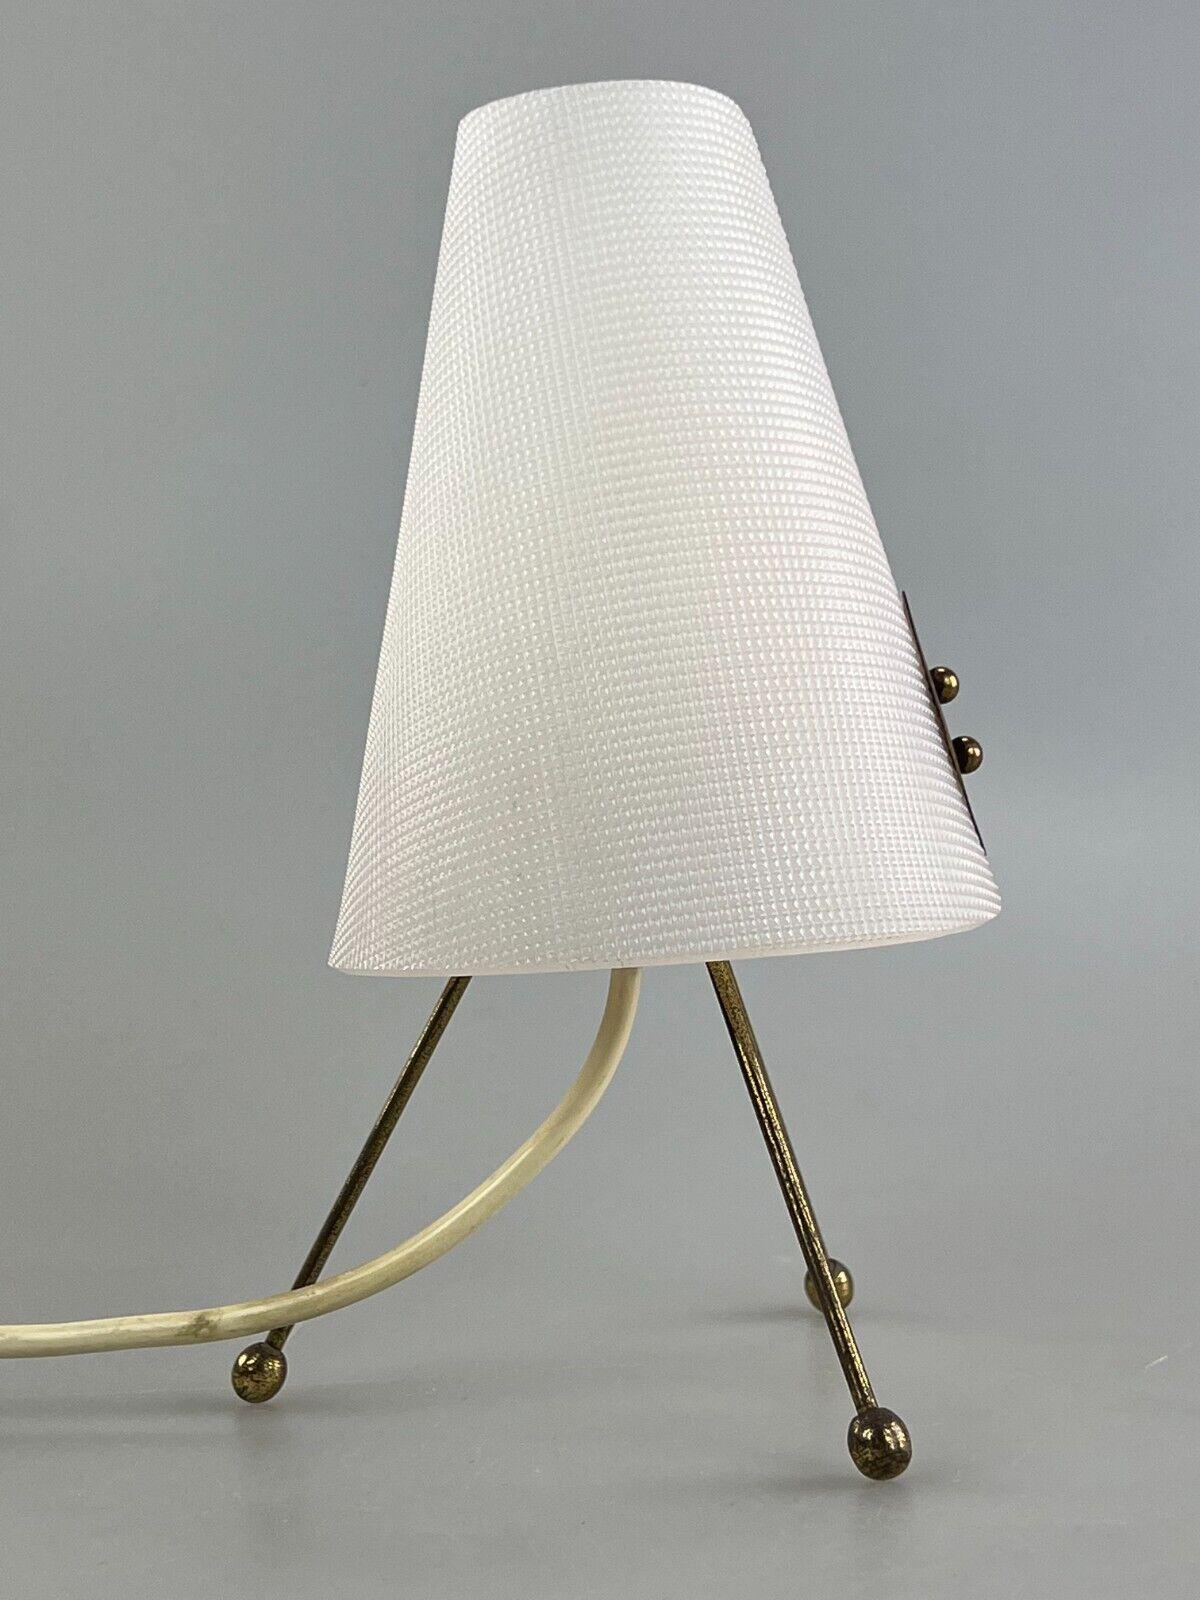 60s 70s Tripod Lamp Acrylic Table Lamp Bedside Lamp Space Age Design 1